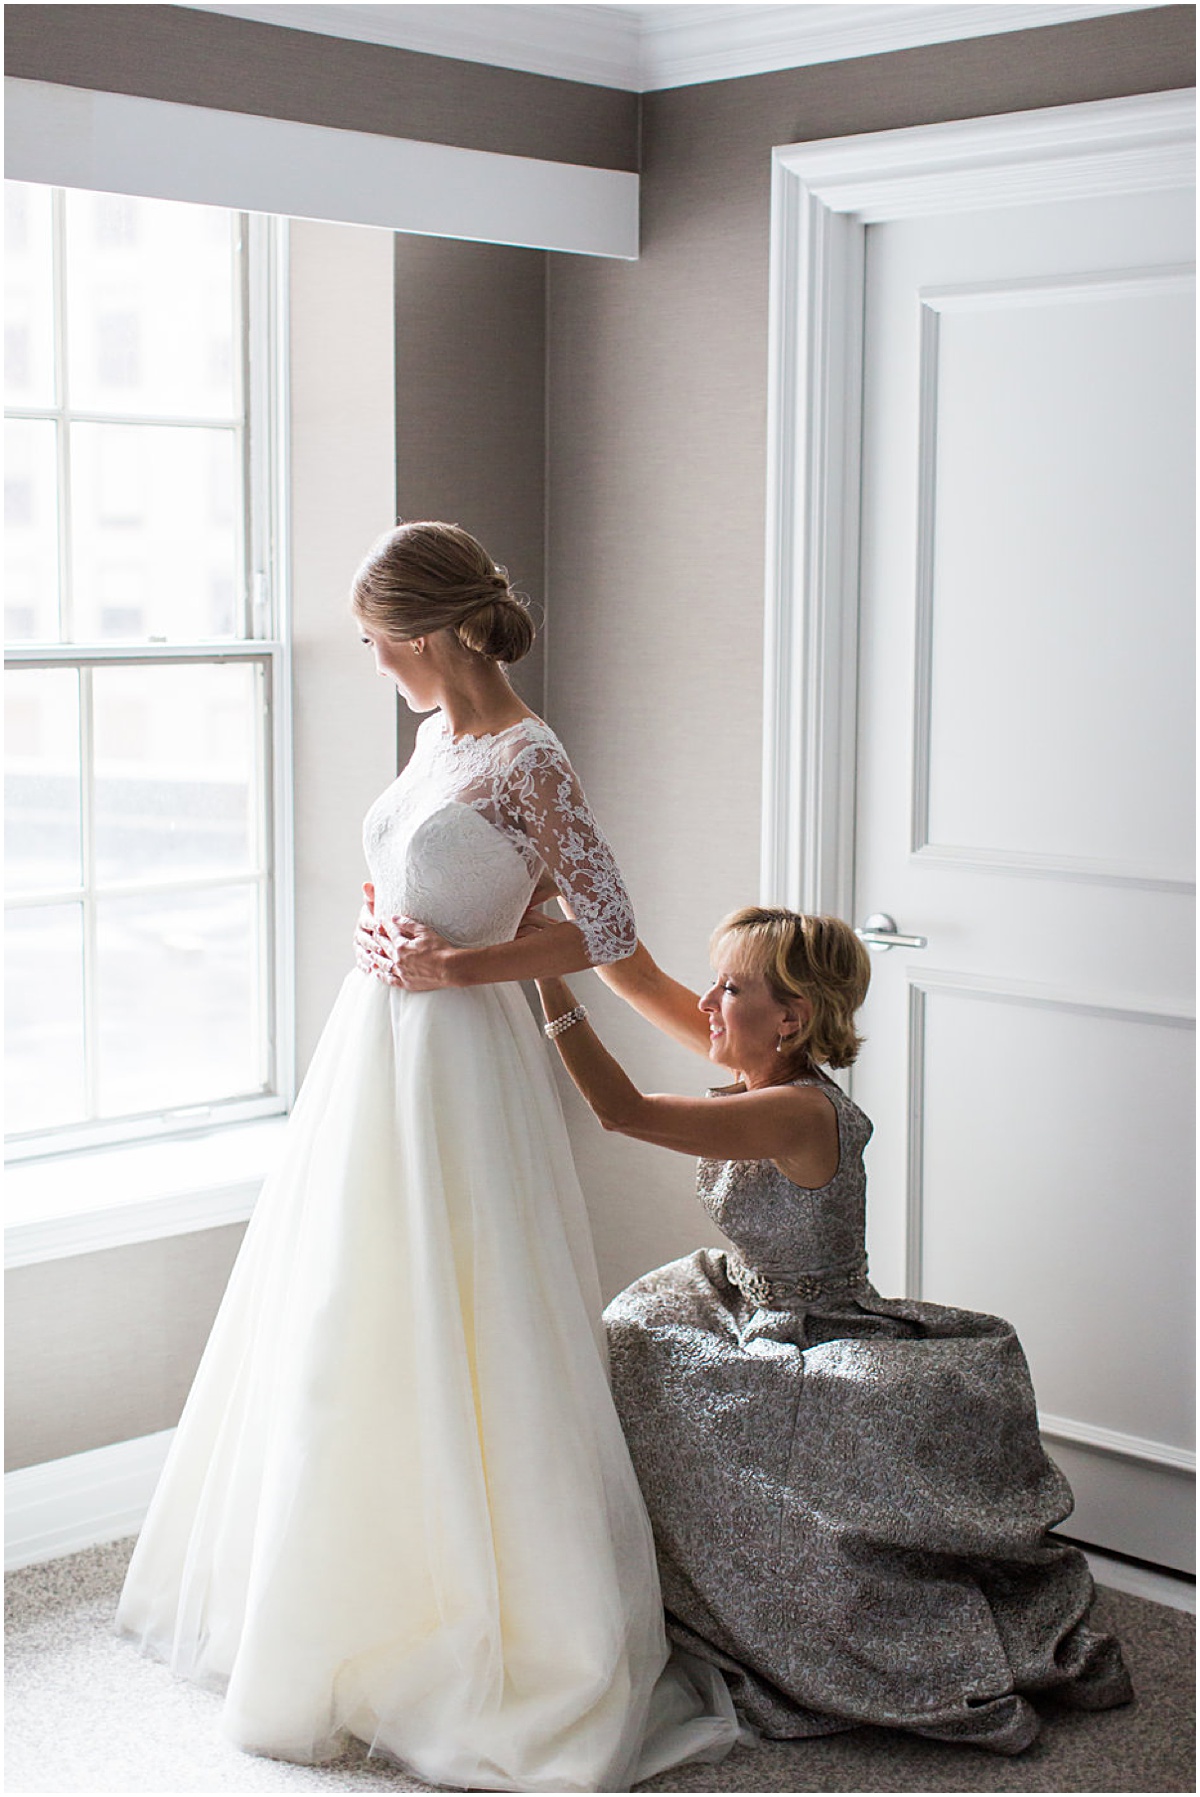 Mom helping bride getting ready at The Mayflower Hotel DC |  | The 10 Best DC Hotels for  Getting Ready on Your Wedding Day